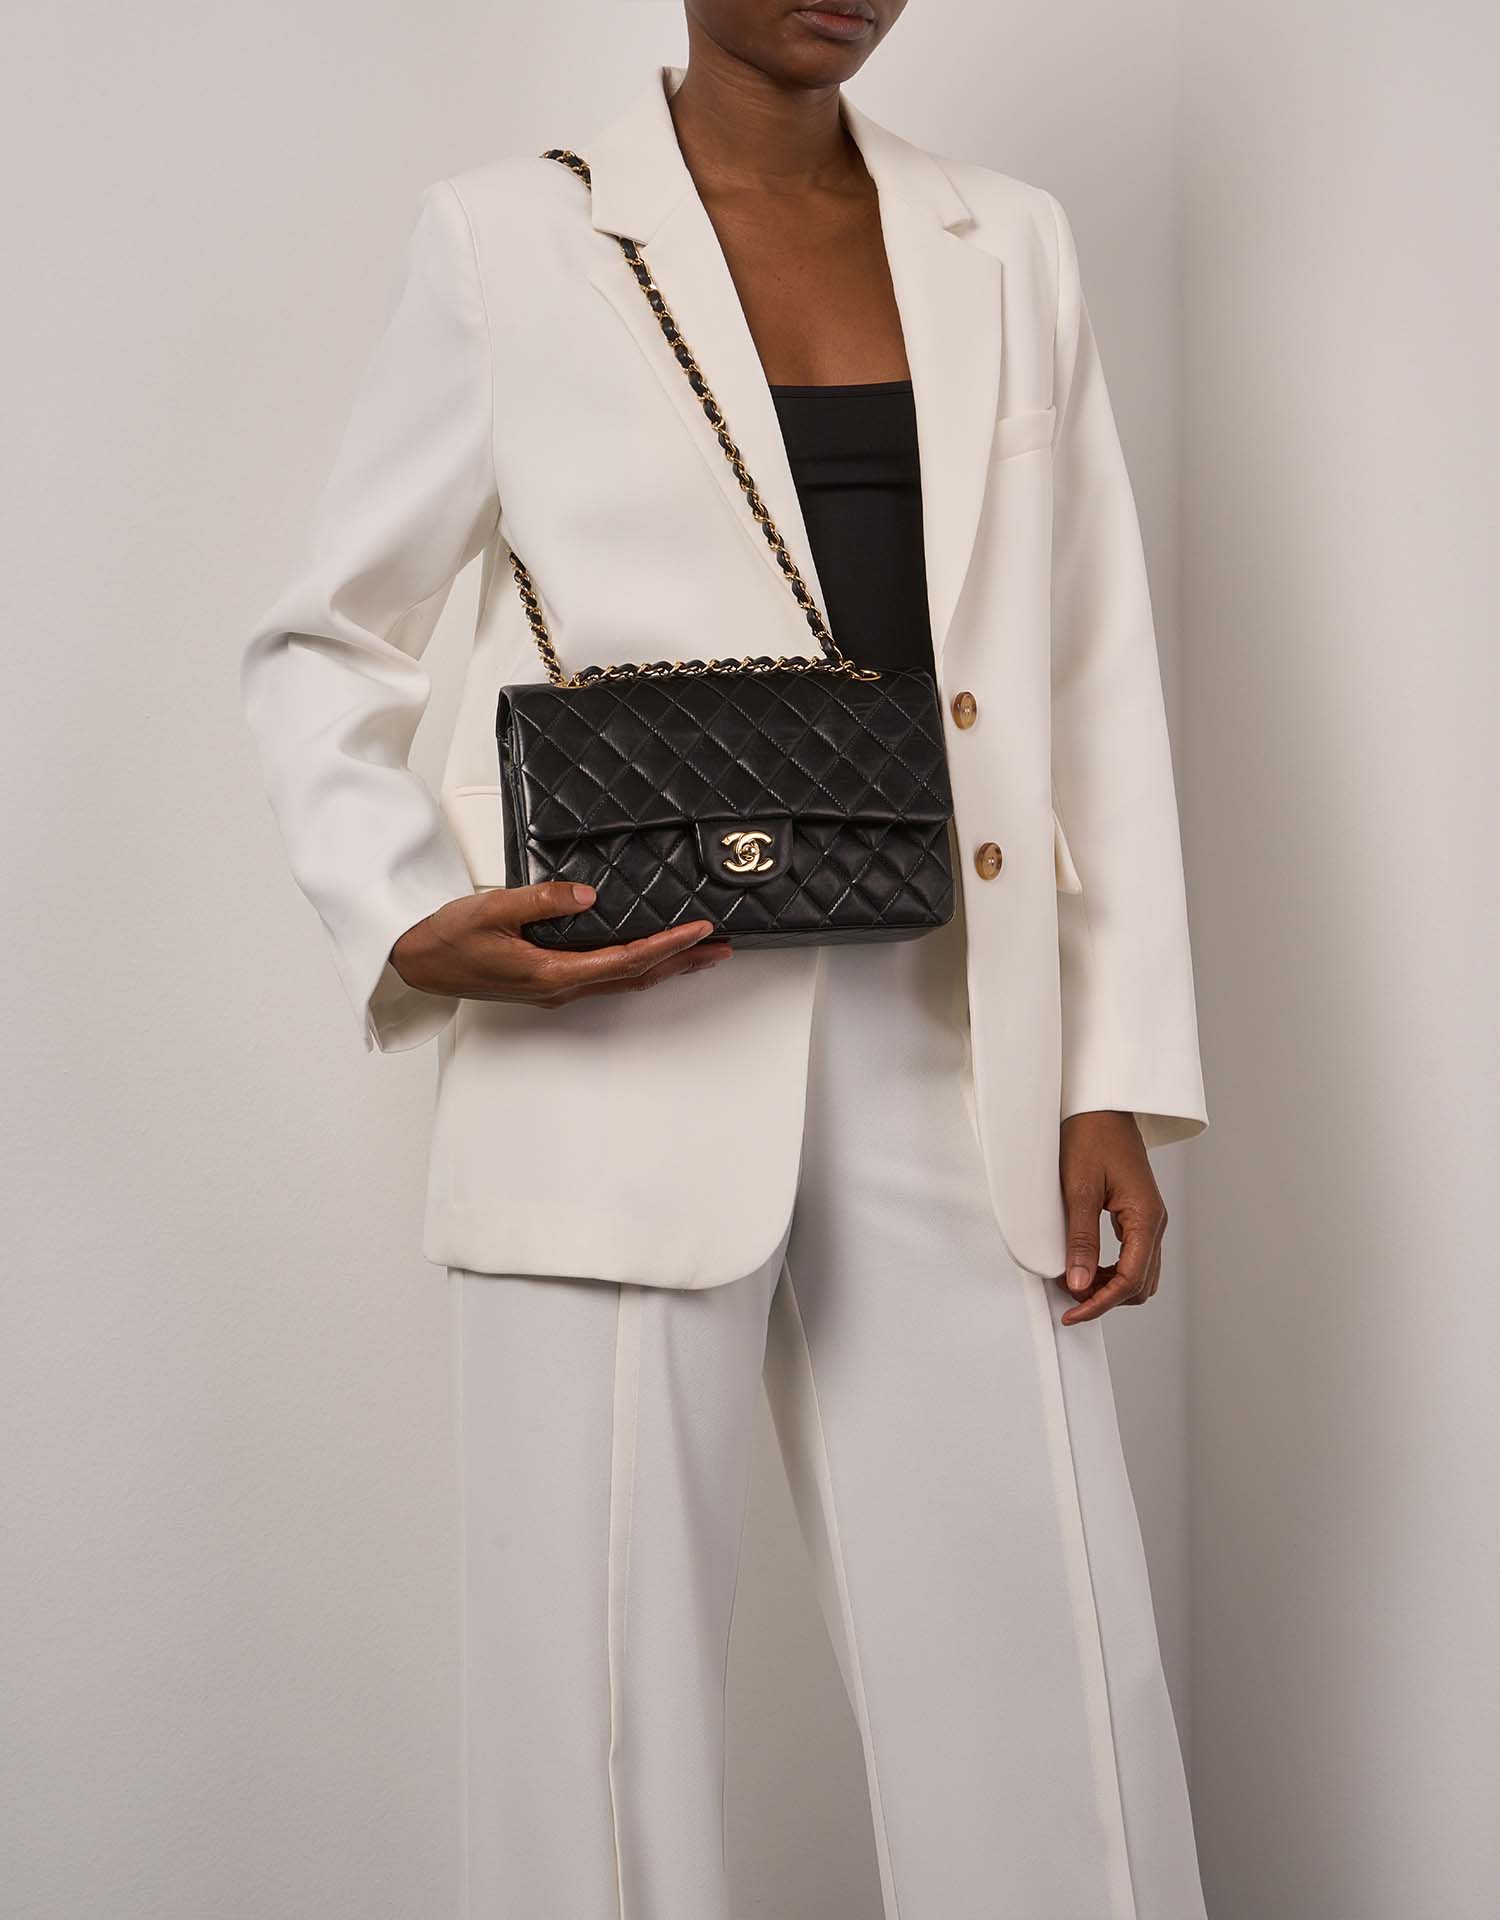 STYLING WHITE AND BEIGE CHANEL CLASSIC FLAP 